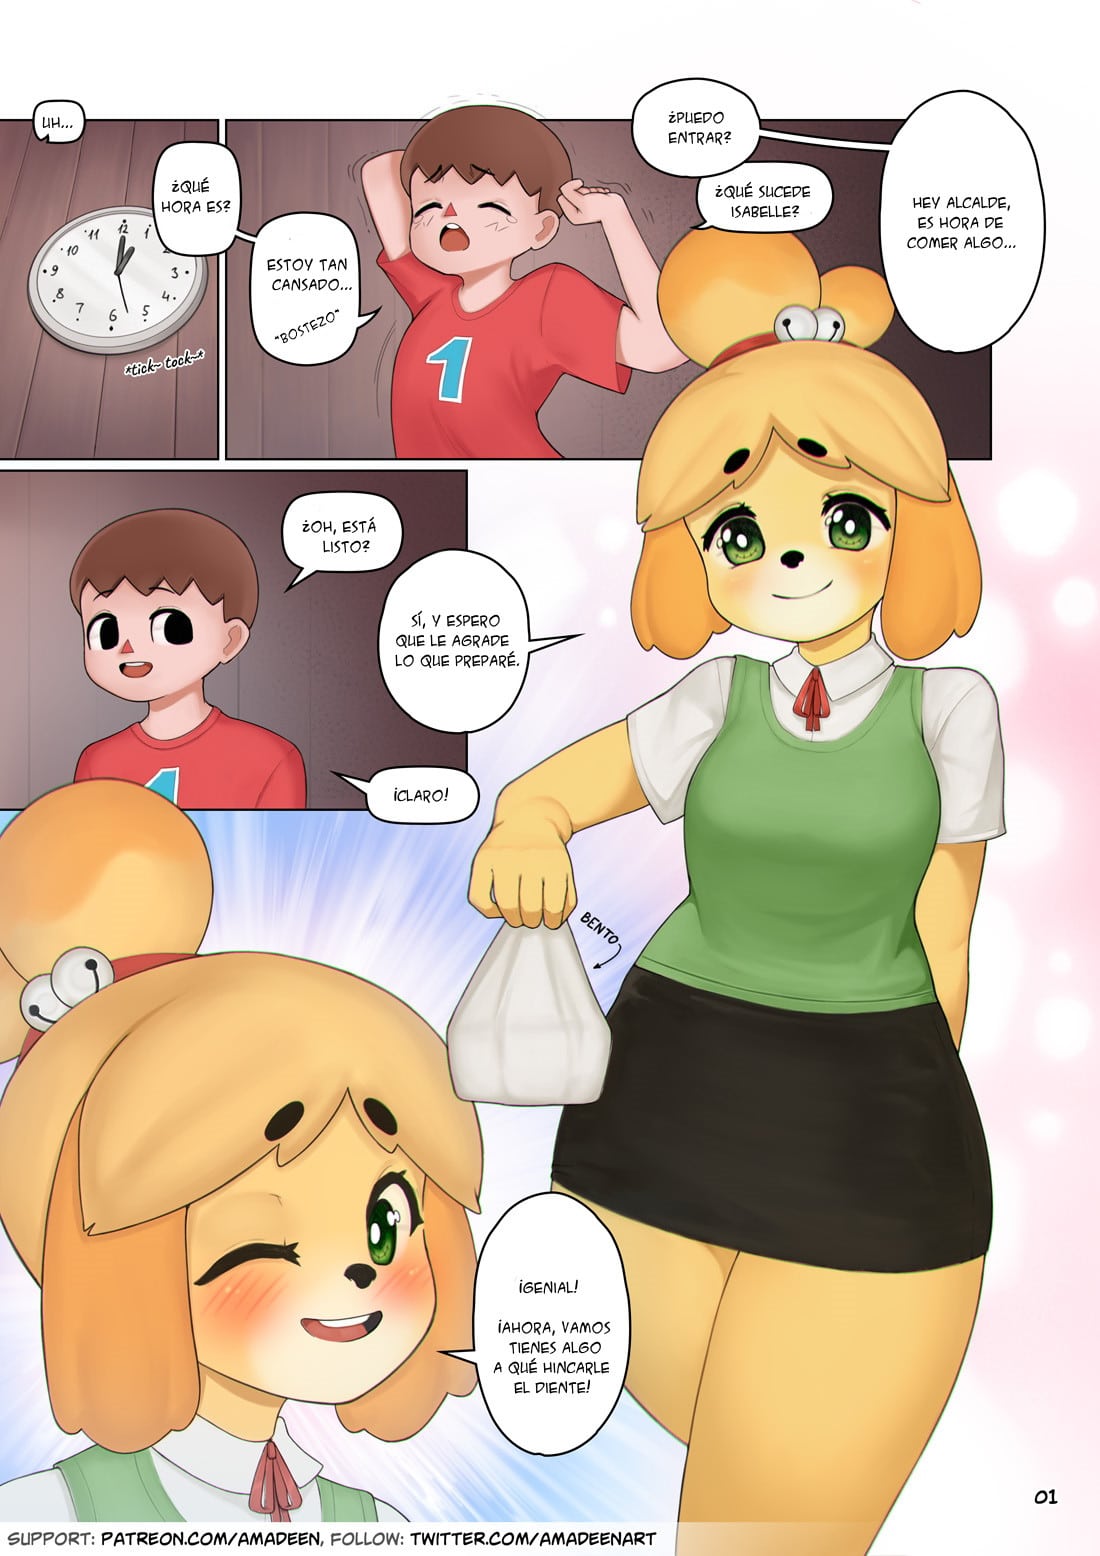 Isabelle’s Lunch Incident - 1